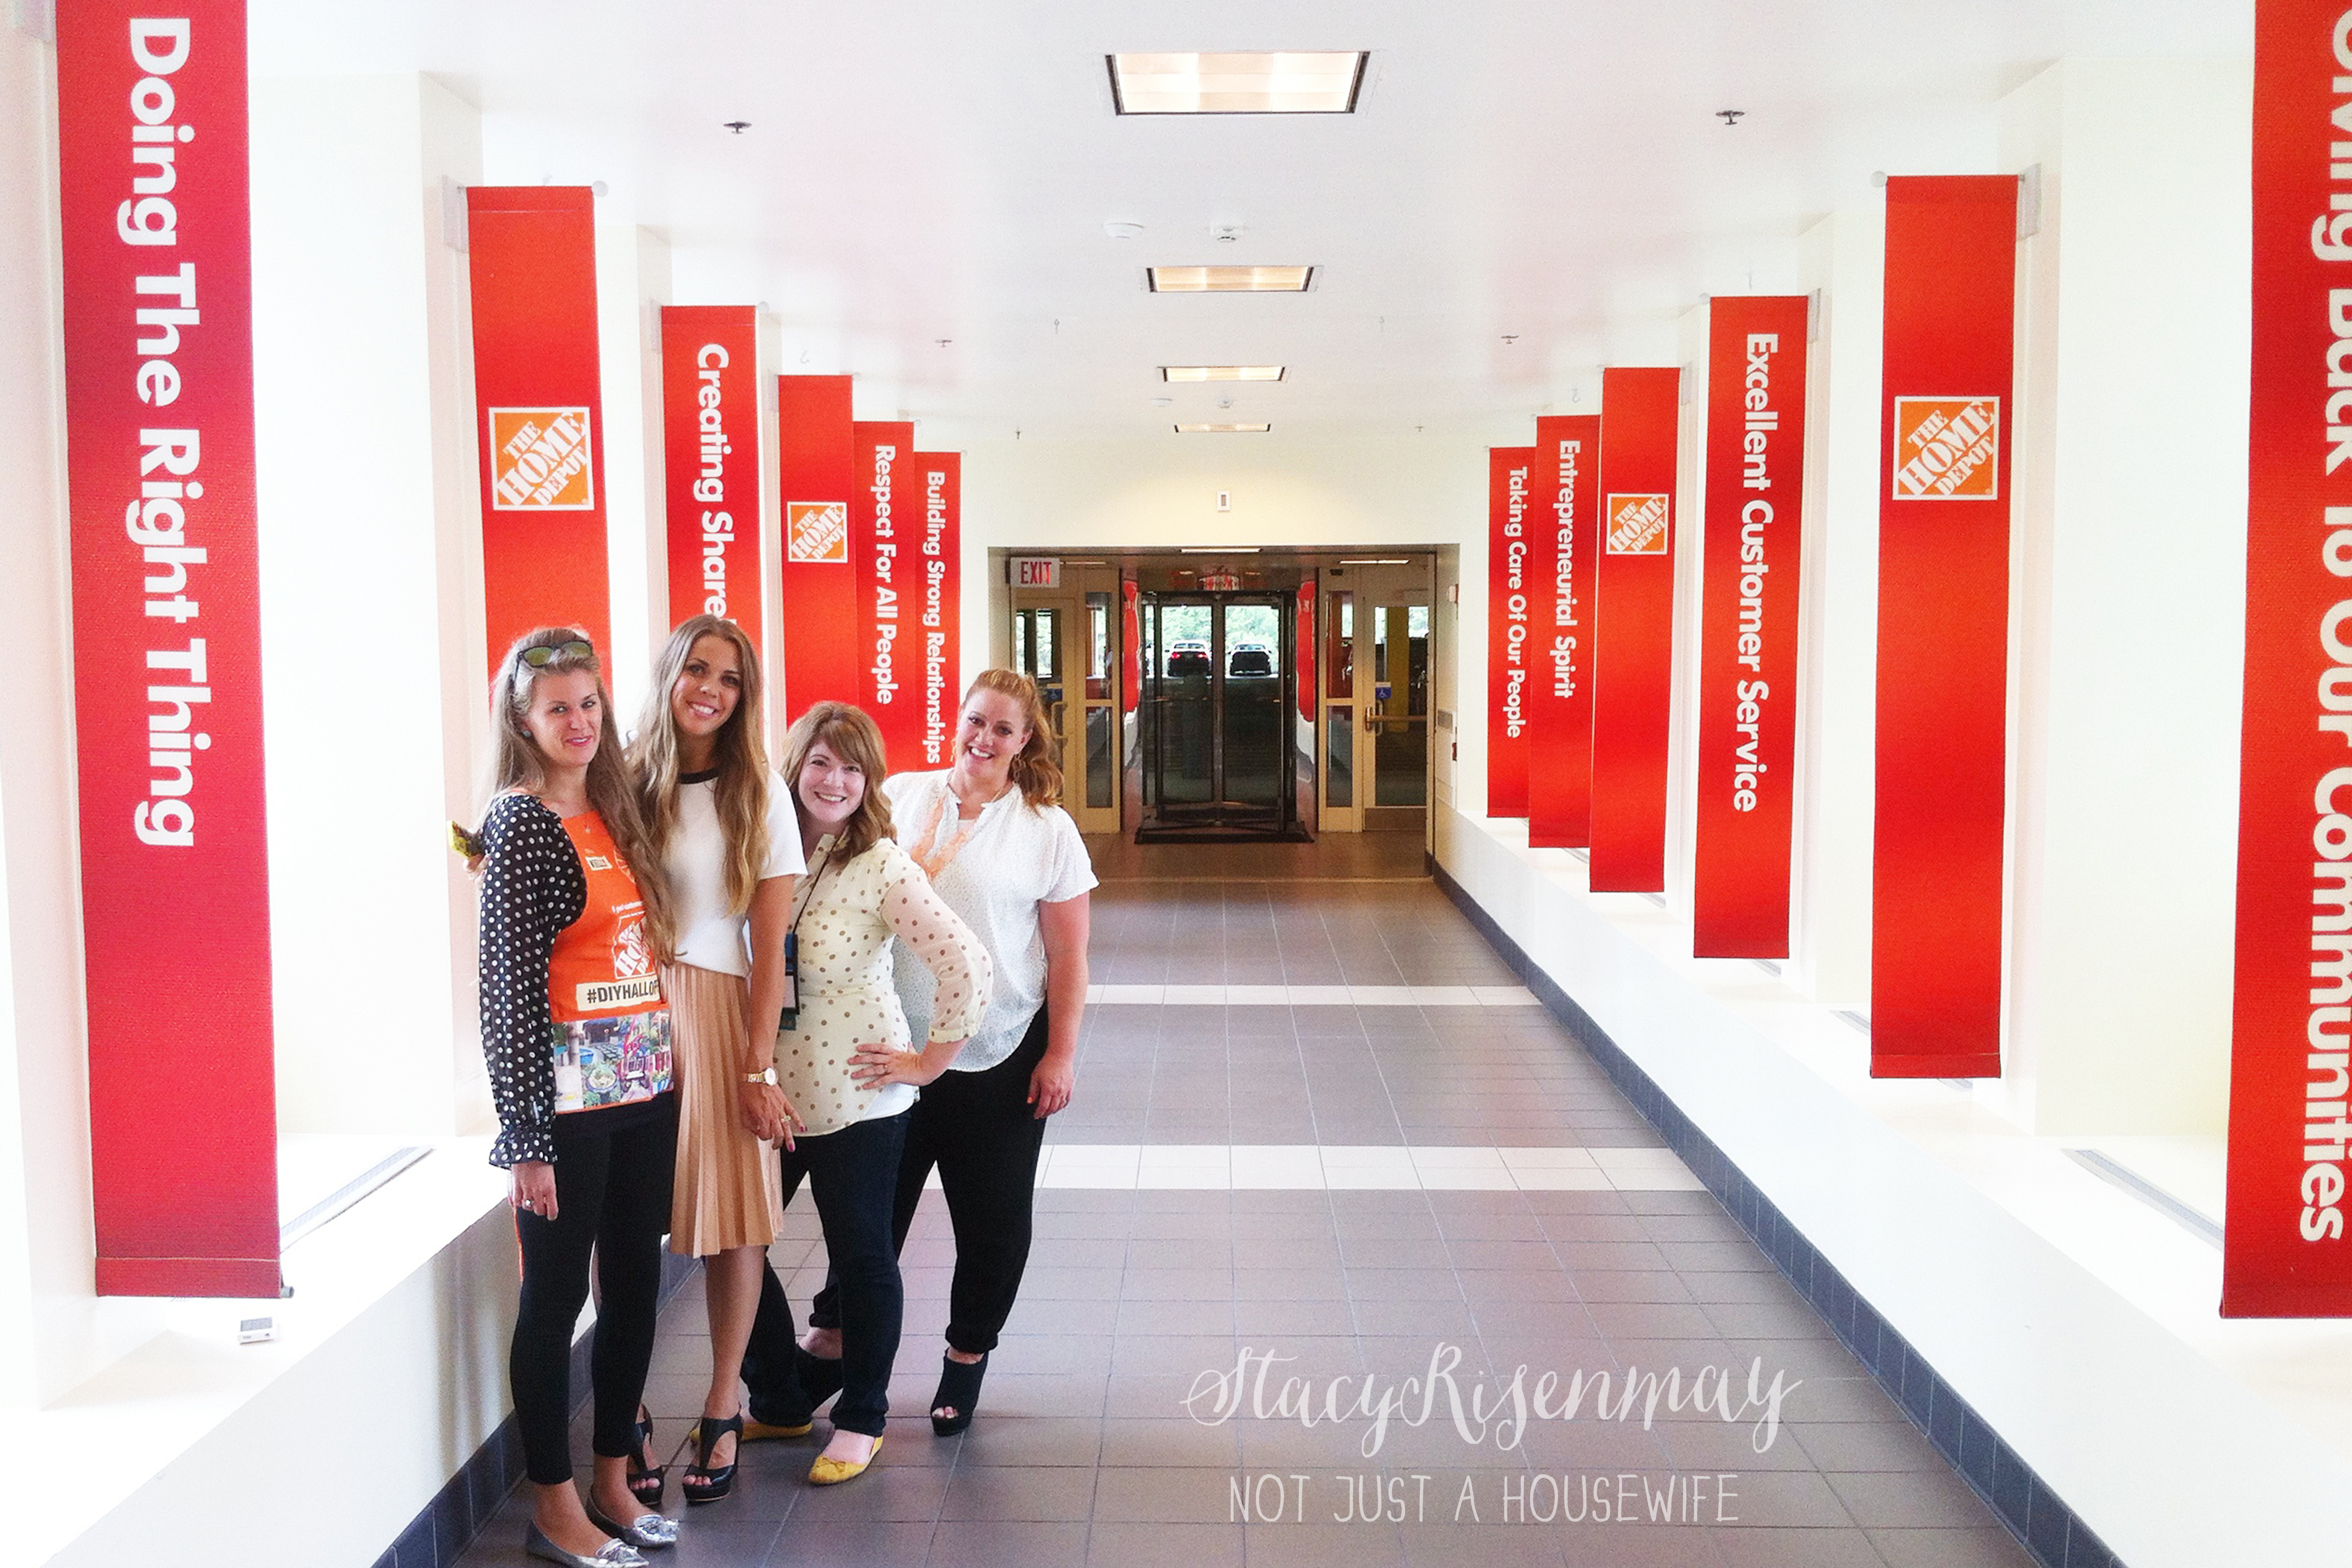 A Glimpse Inside Home Depot Headquarters - Stacy Risenmay